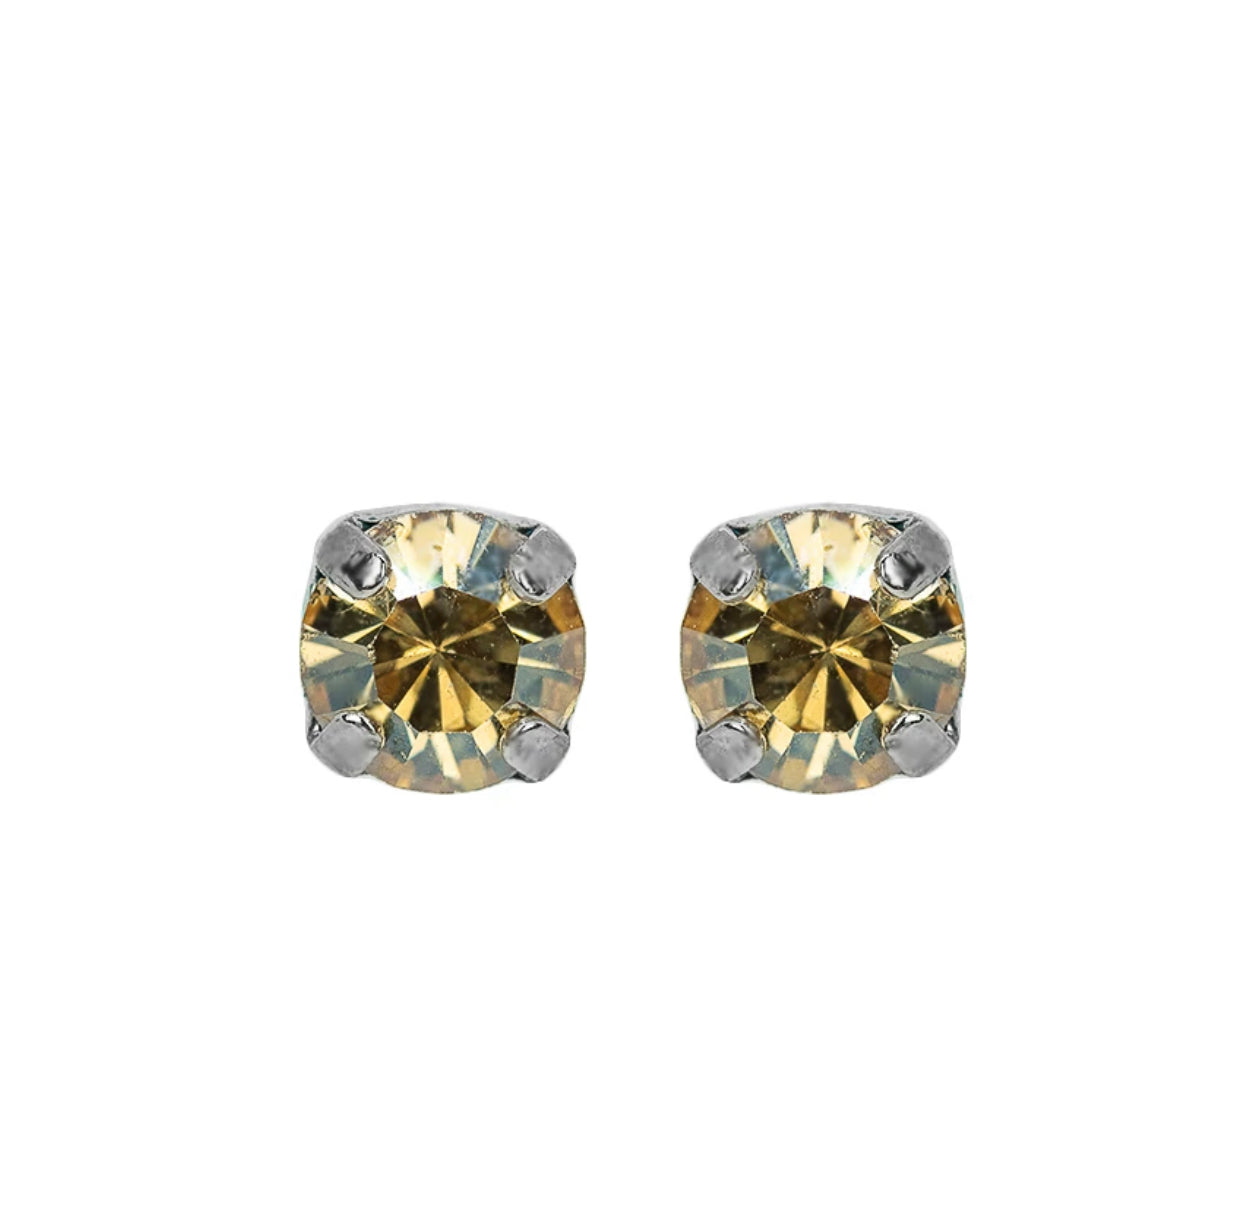 Mariana Rhodium Plated Petite Single Stone Post Earrings in "Golden Shadow”